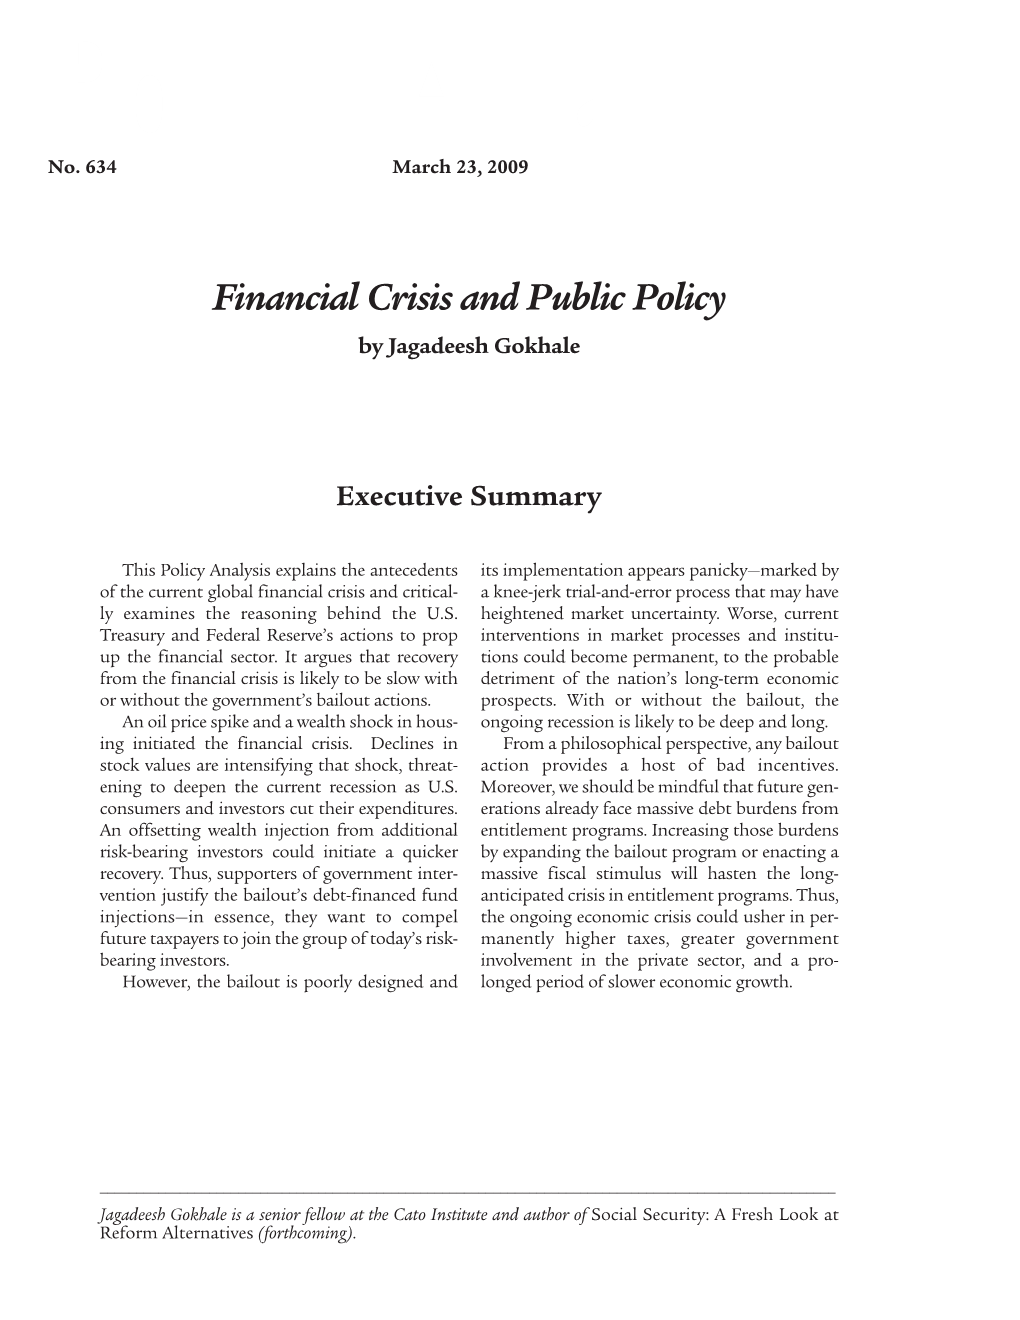 Financial Crisis and Public Policy by Jagadeesh Gokhale